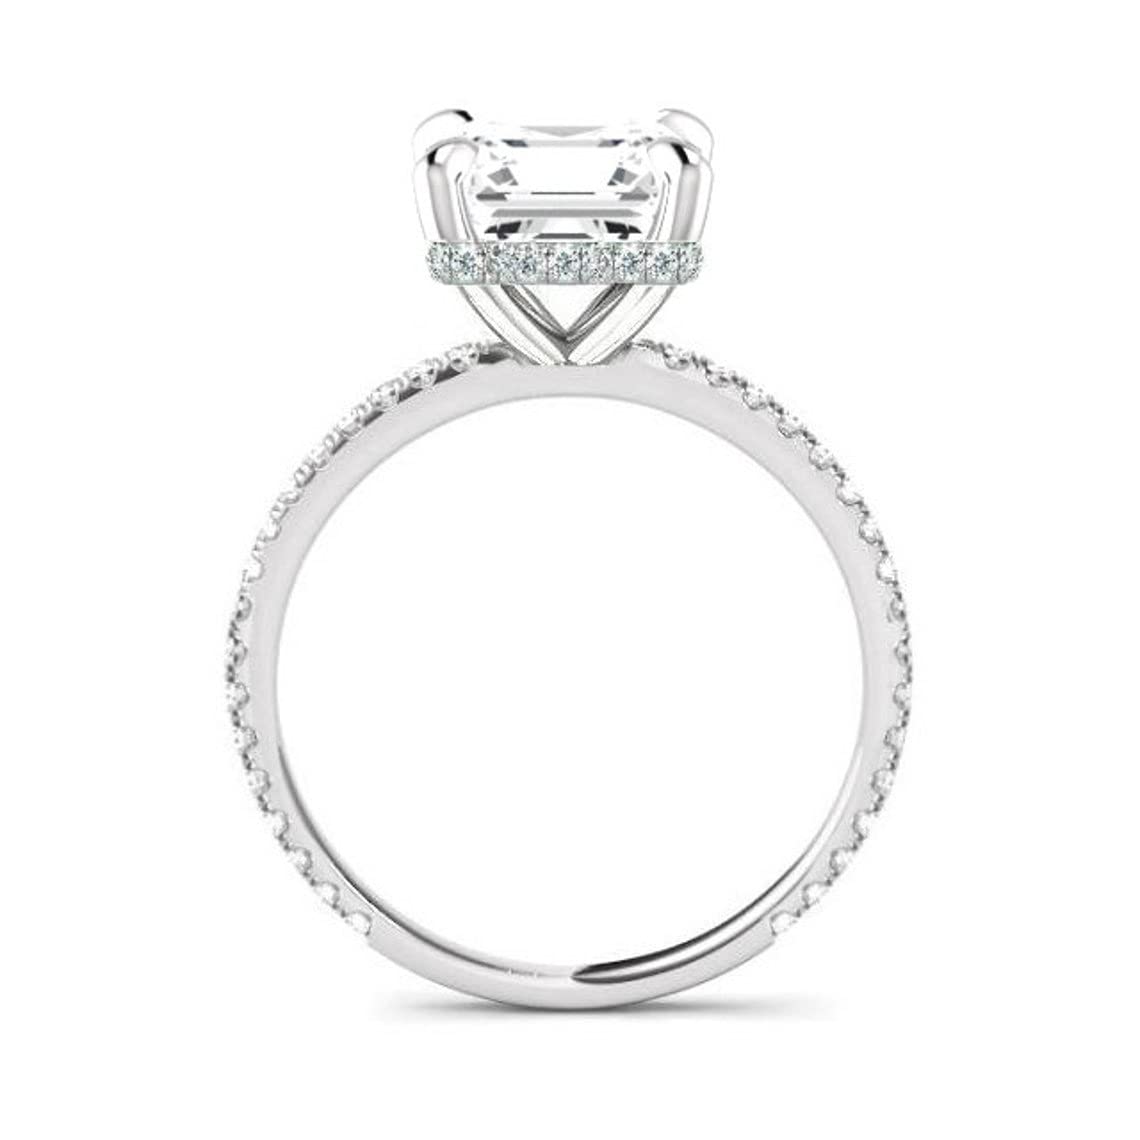 JEWELERYIUM 5.0 CT Radiant Cut, Colorless Moissanite Engagement Ring, Wedding/Bridal Ring Set, Solitaire Halo Style, Solid Sterling Silver Vintage Antique Anniversary Promise Rings Gift for Her